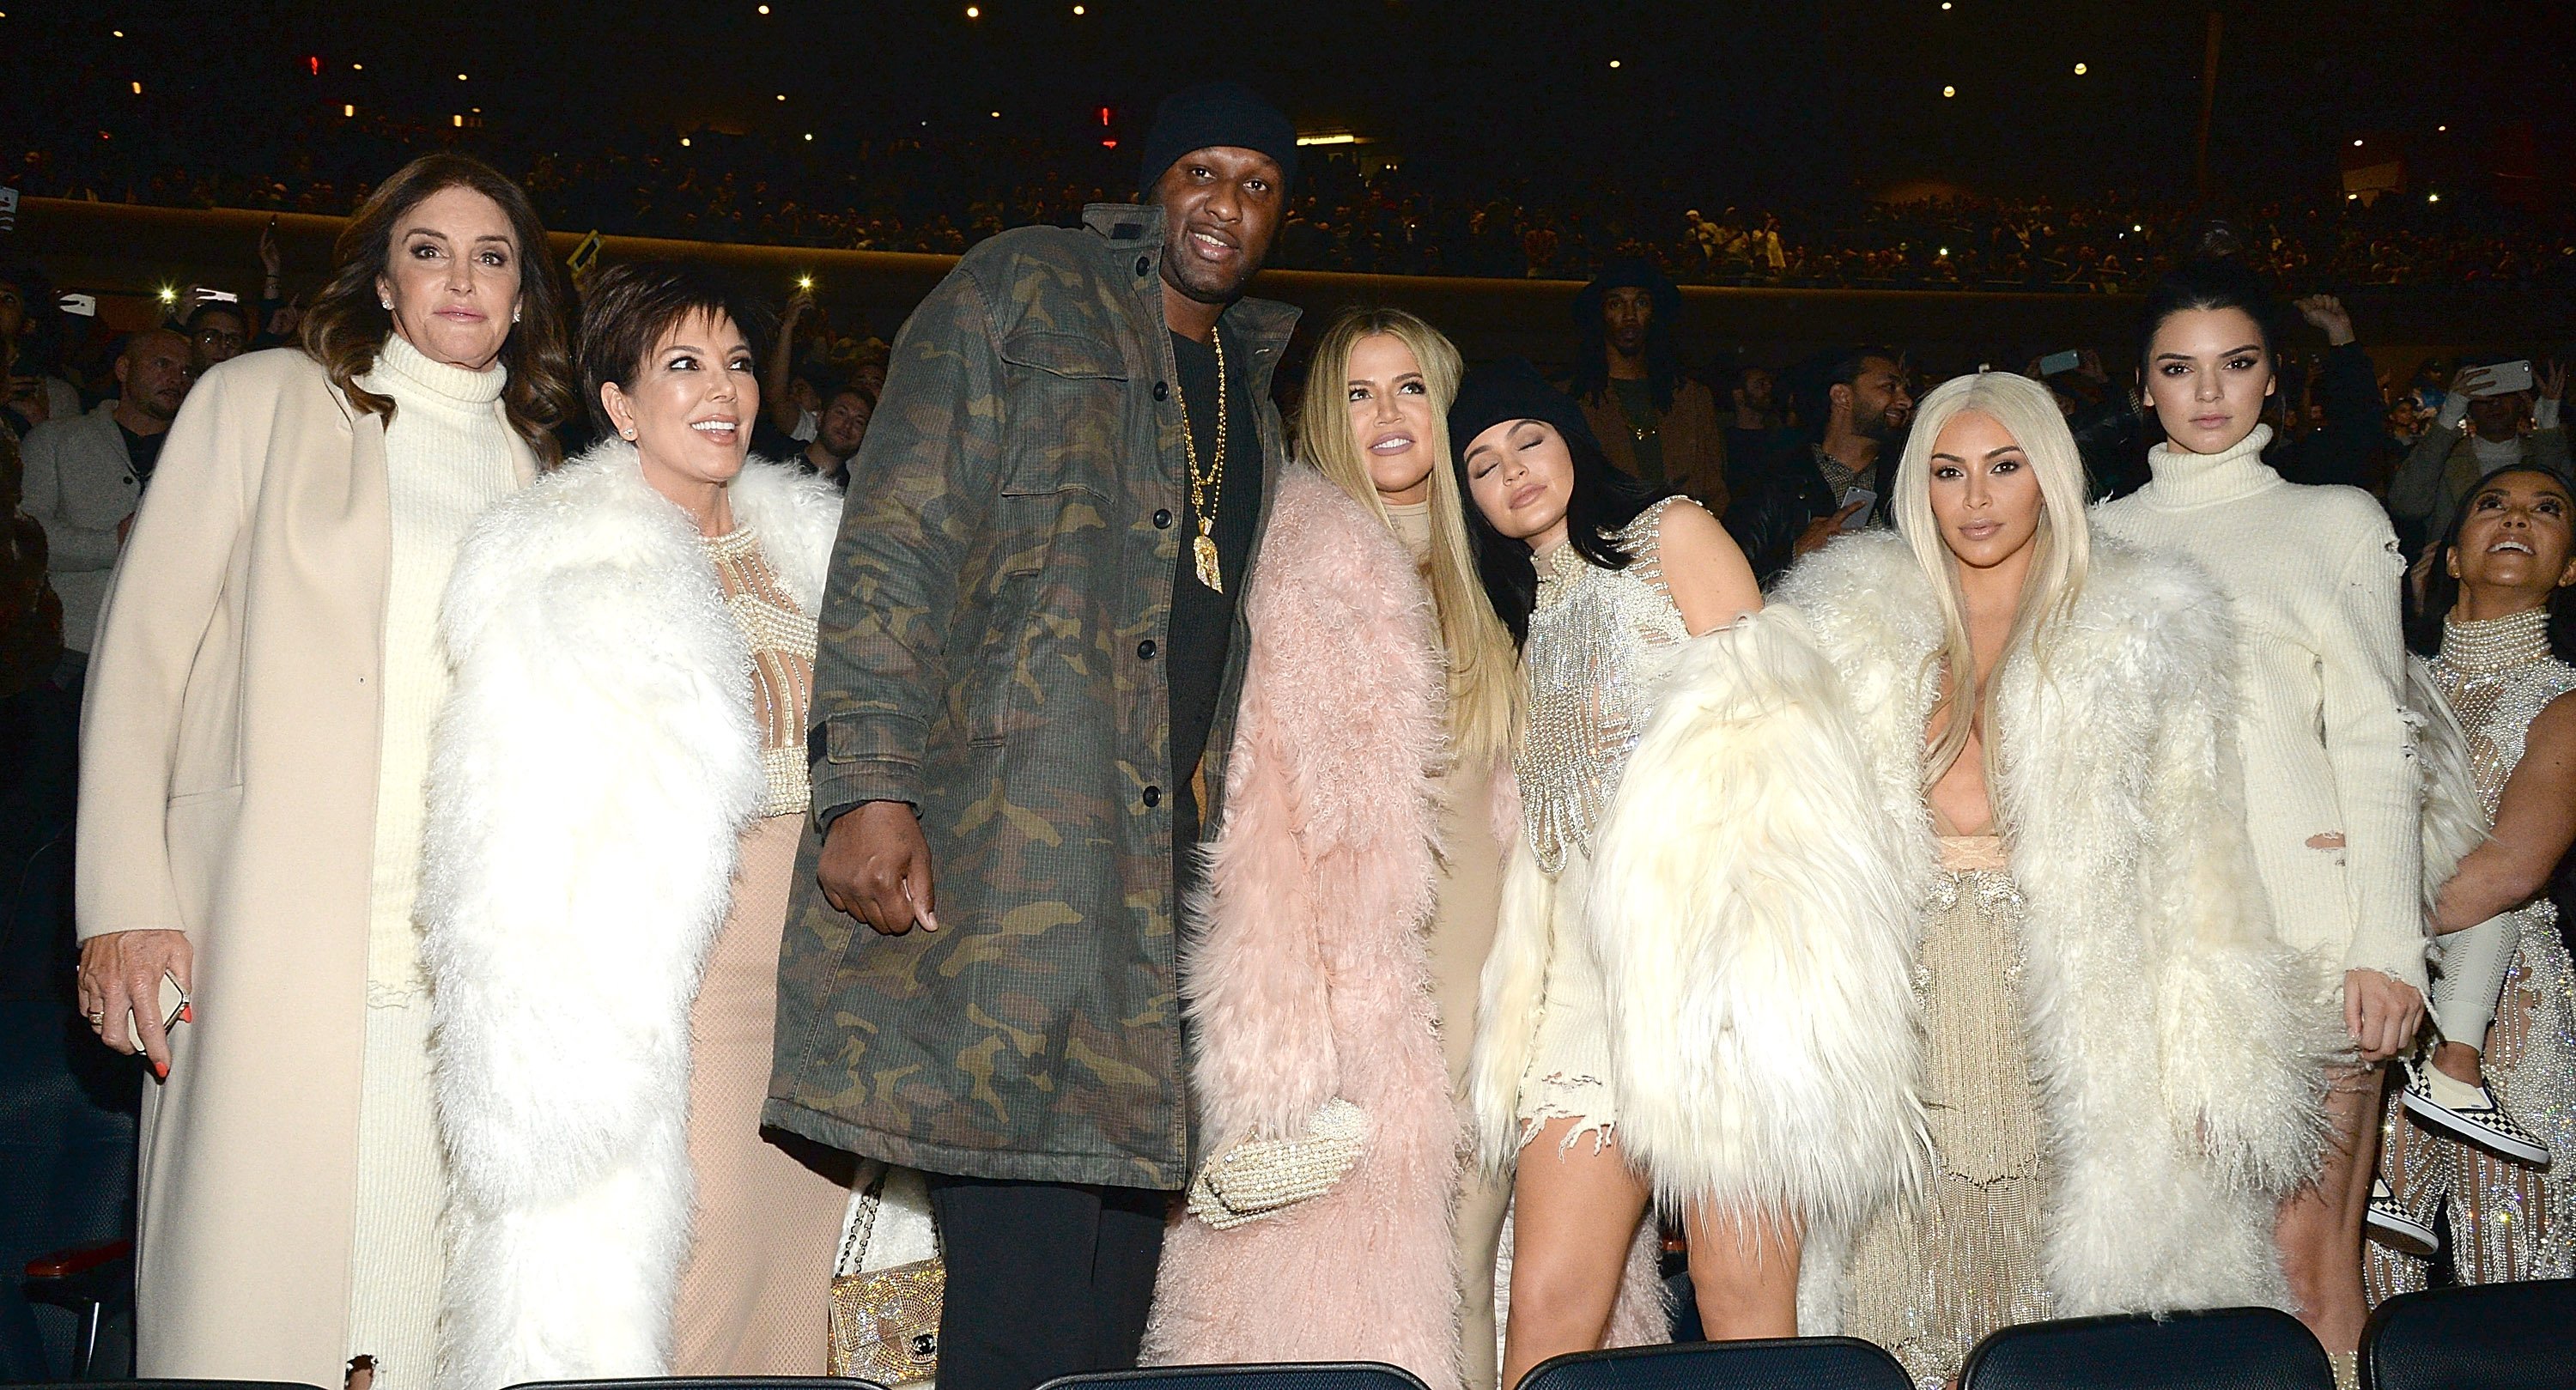 Lamar Odom Recalls the Kar-Jenners ‘Pulling up Like the A-Team’ to Save His Life